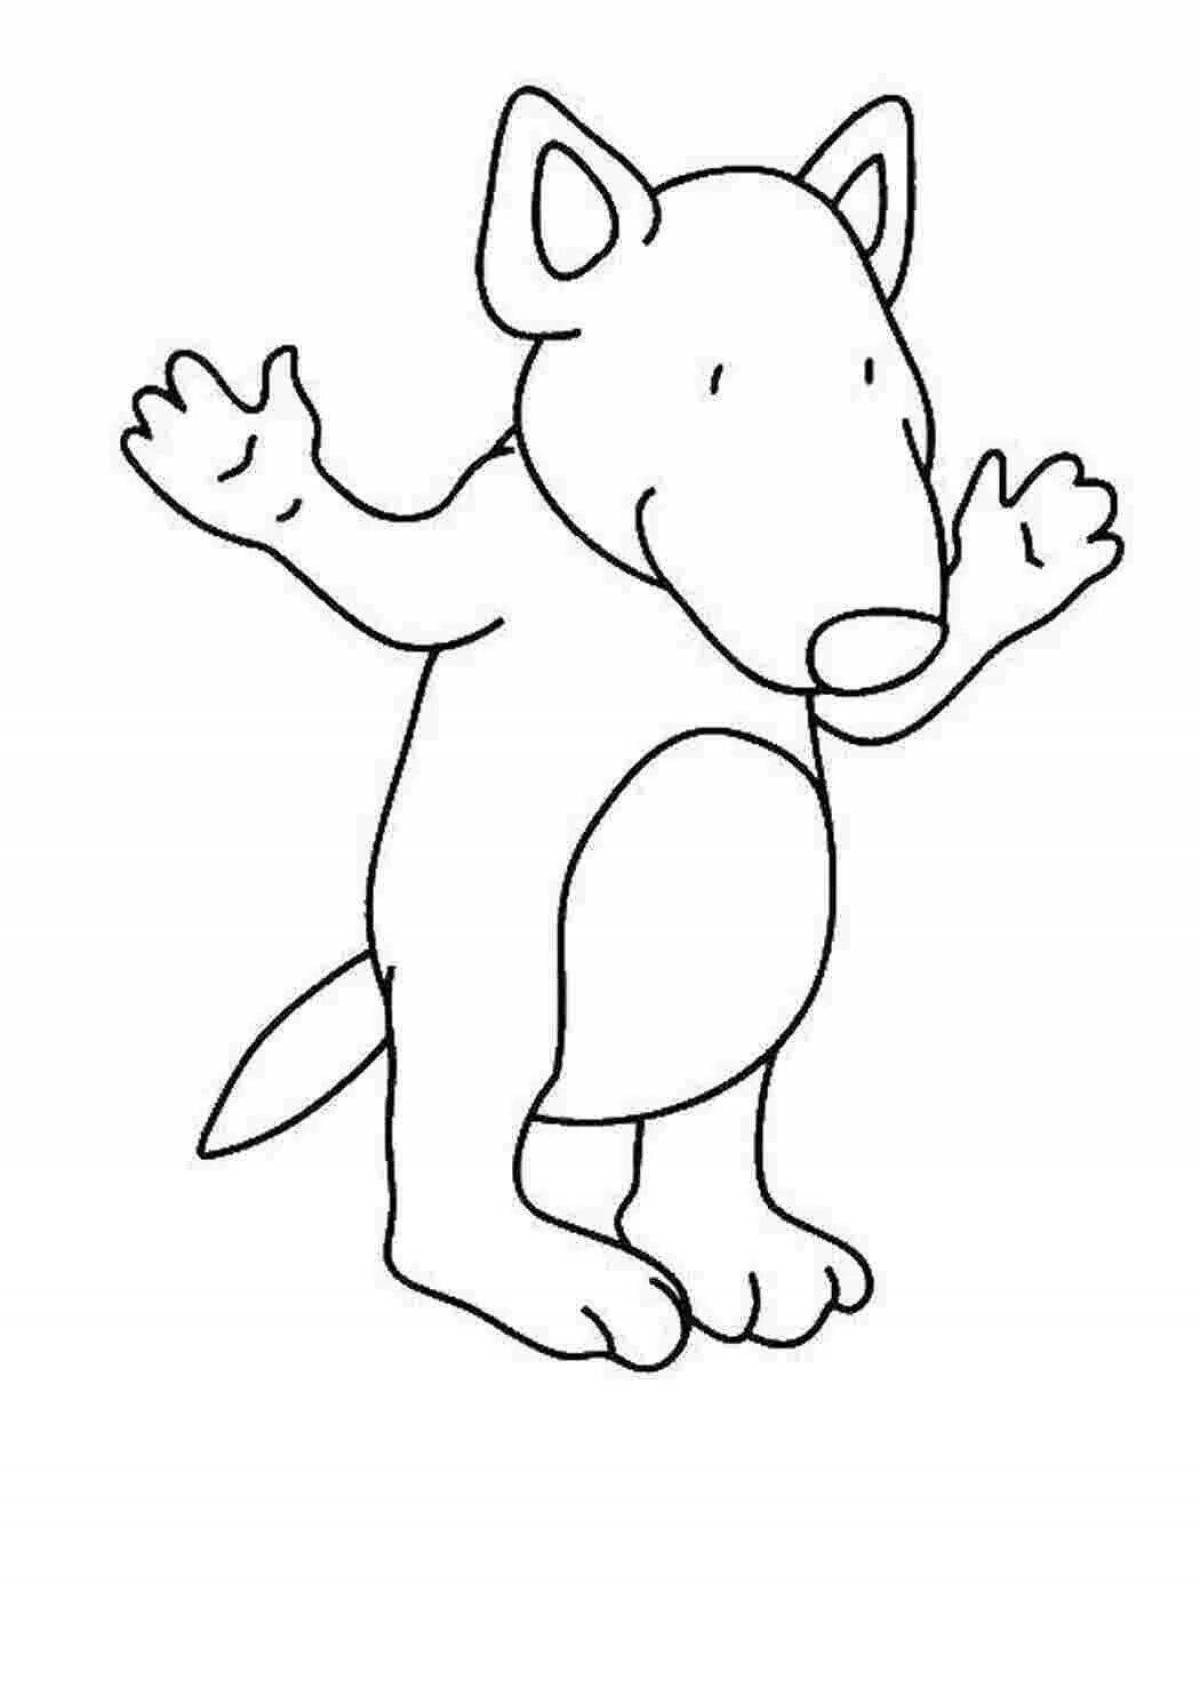 Exquisite wolf cub coloring page